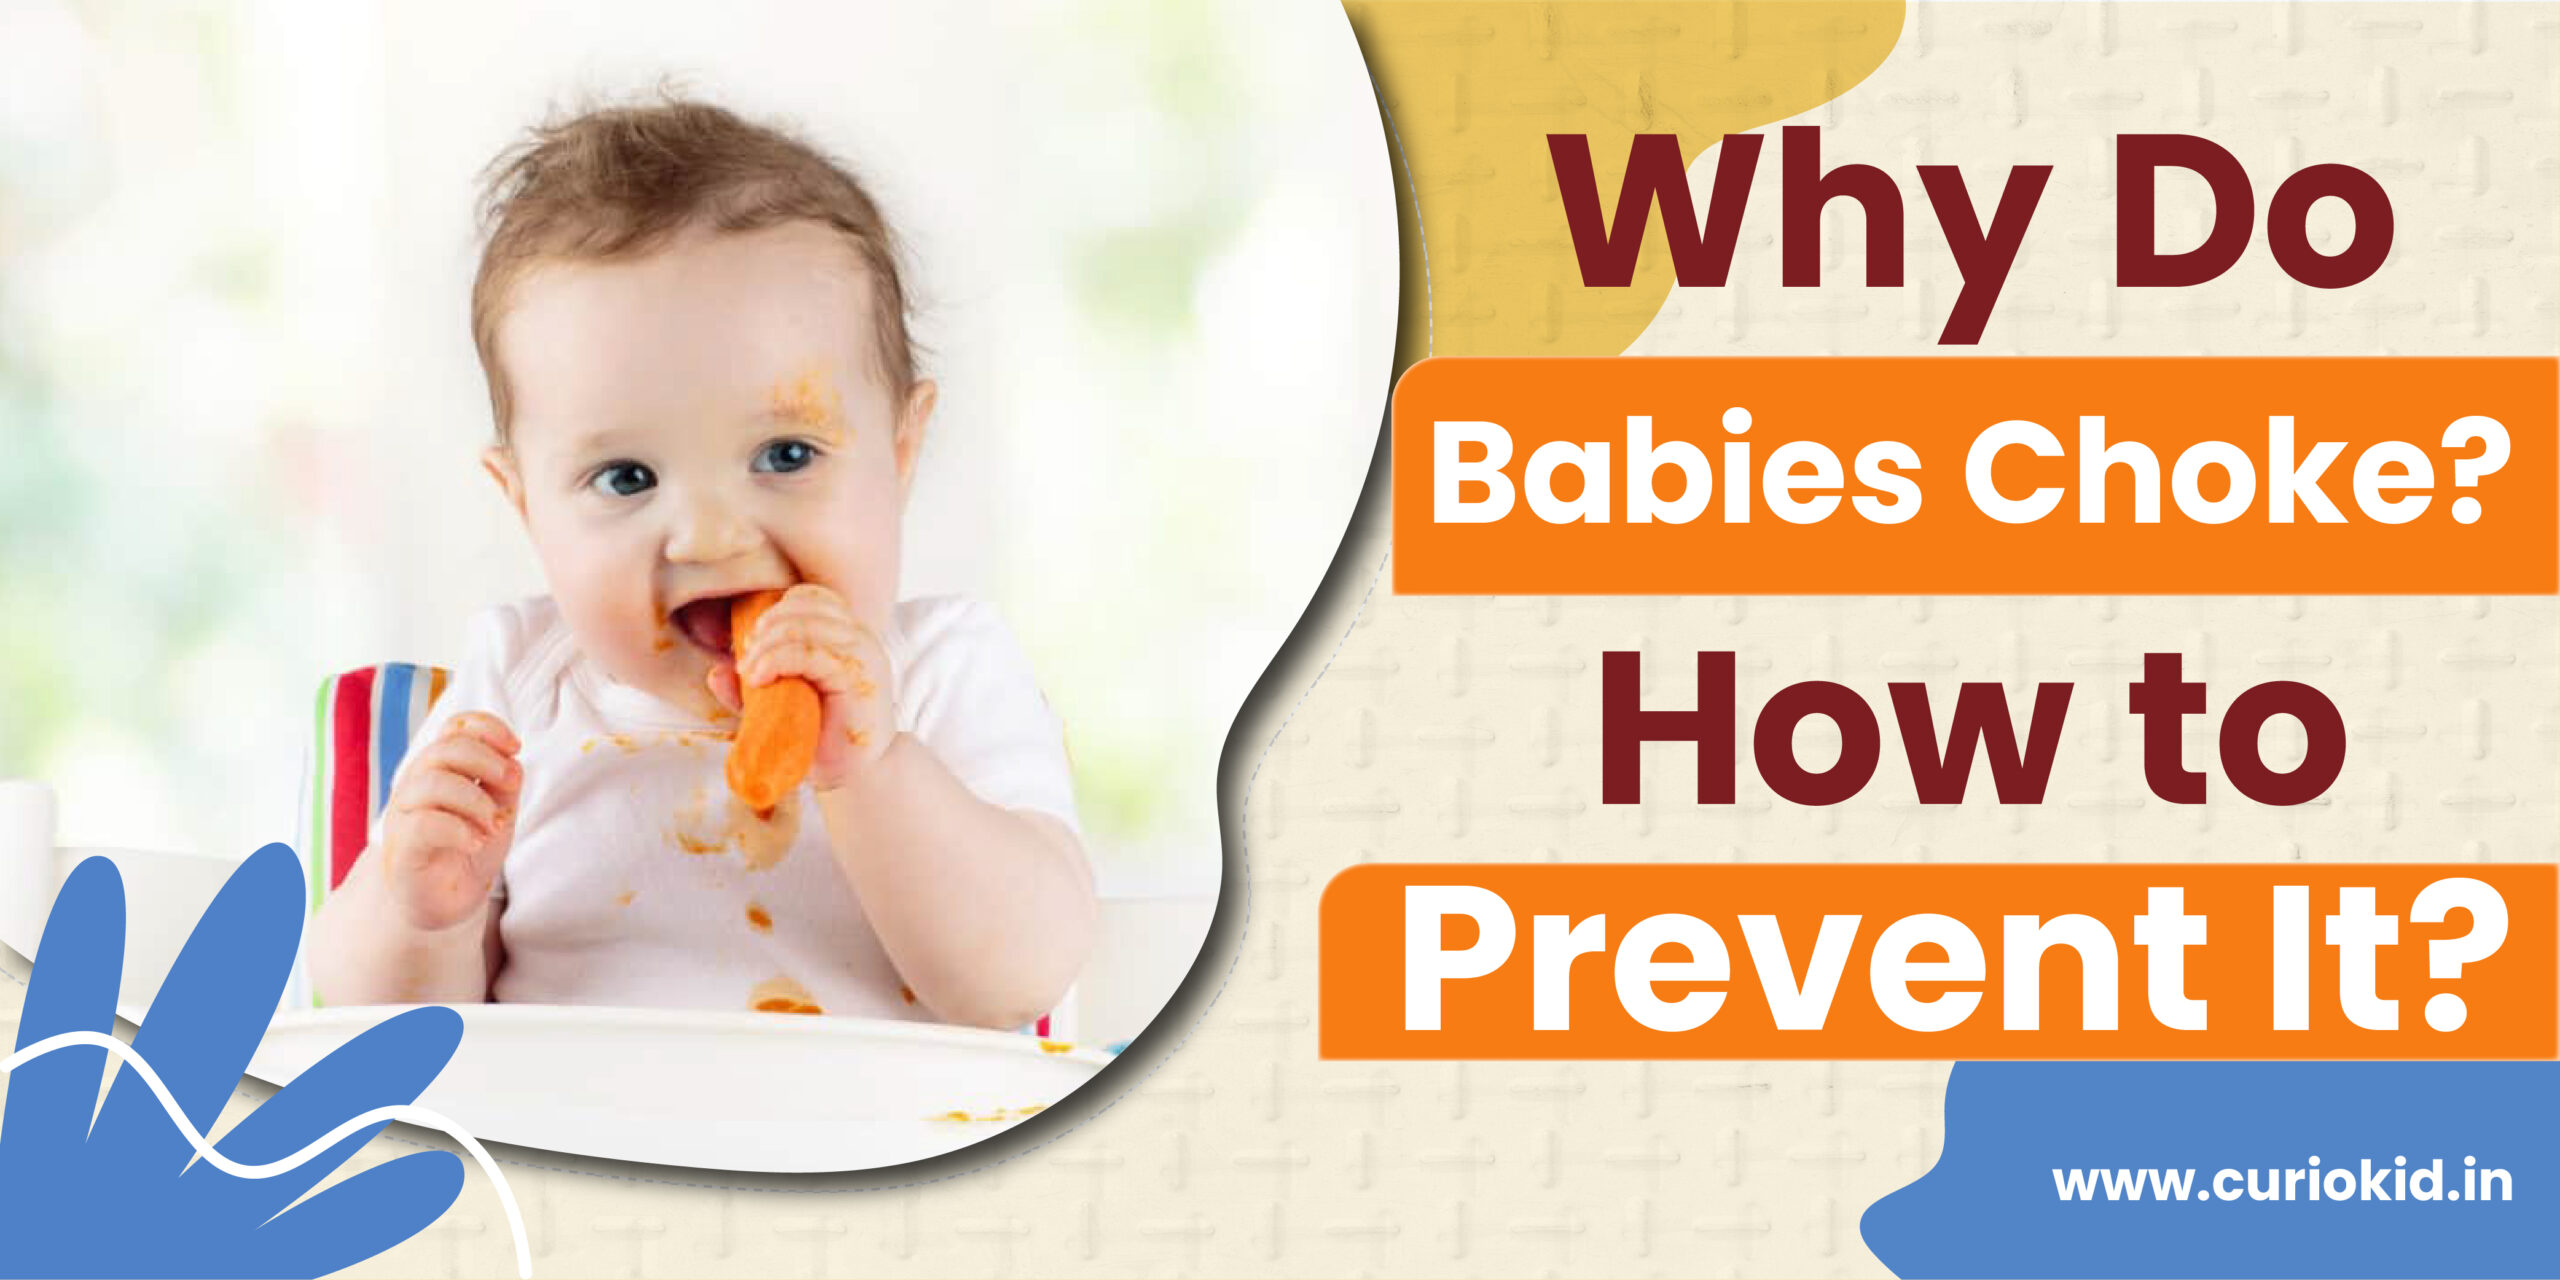 Why Do Babies Choke? and How to Prevent It?